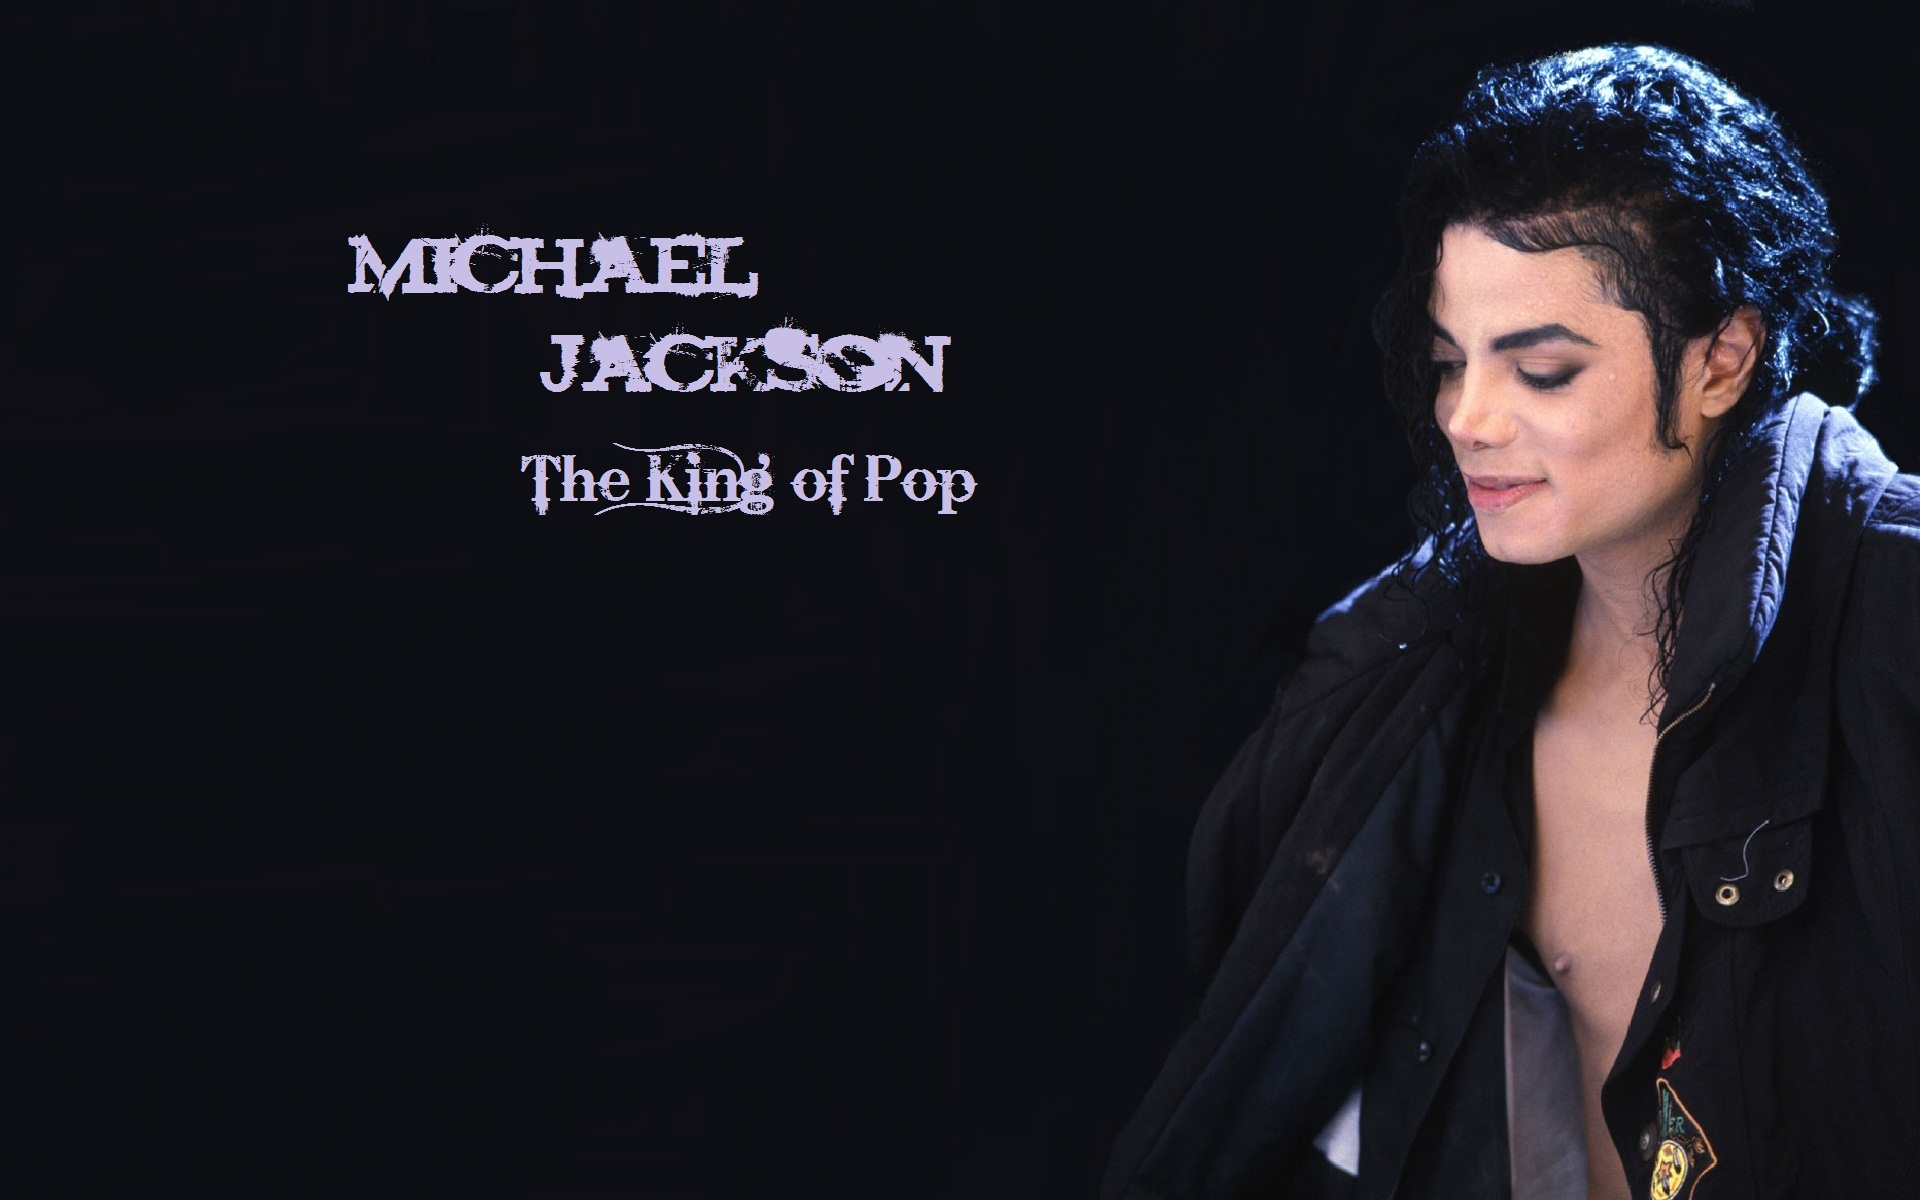 Michael Jackson Wallpaper Pictures In High Definition Or